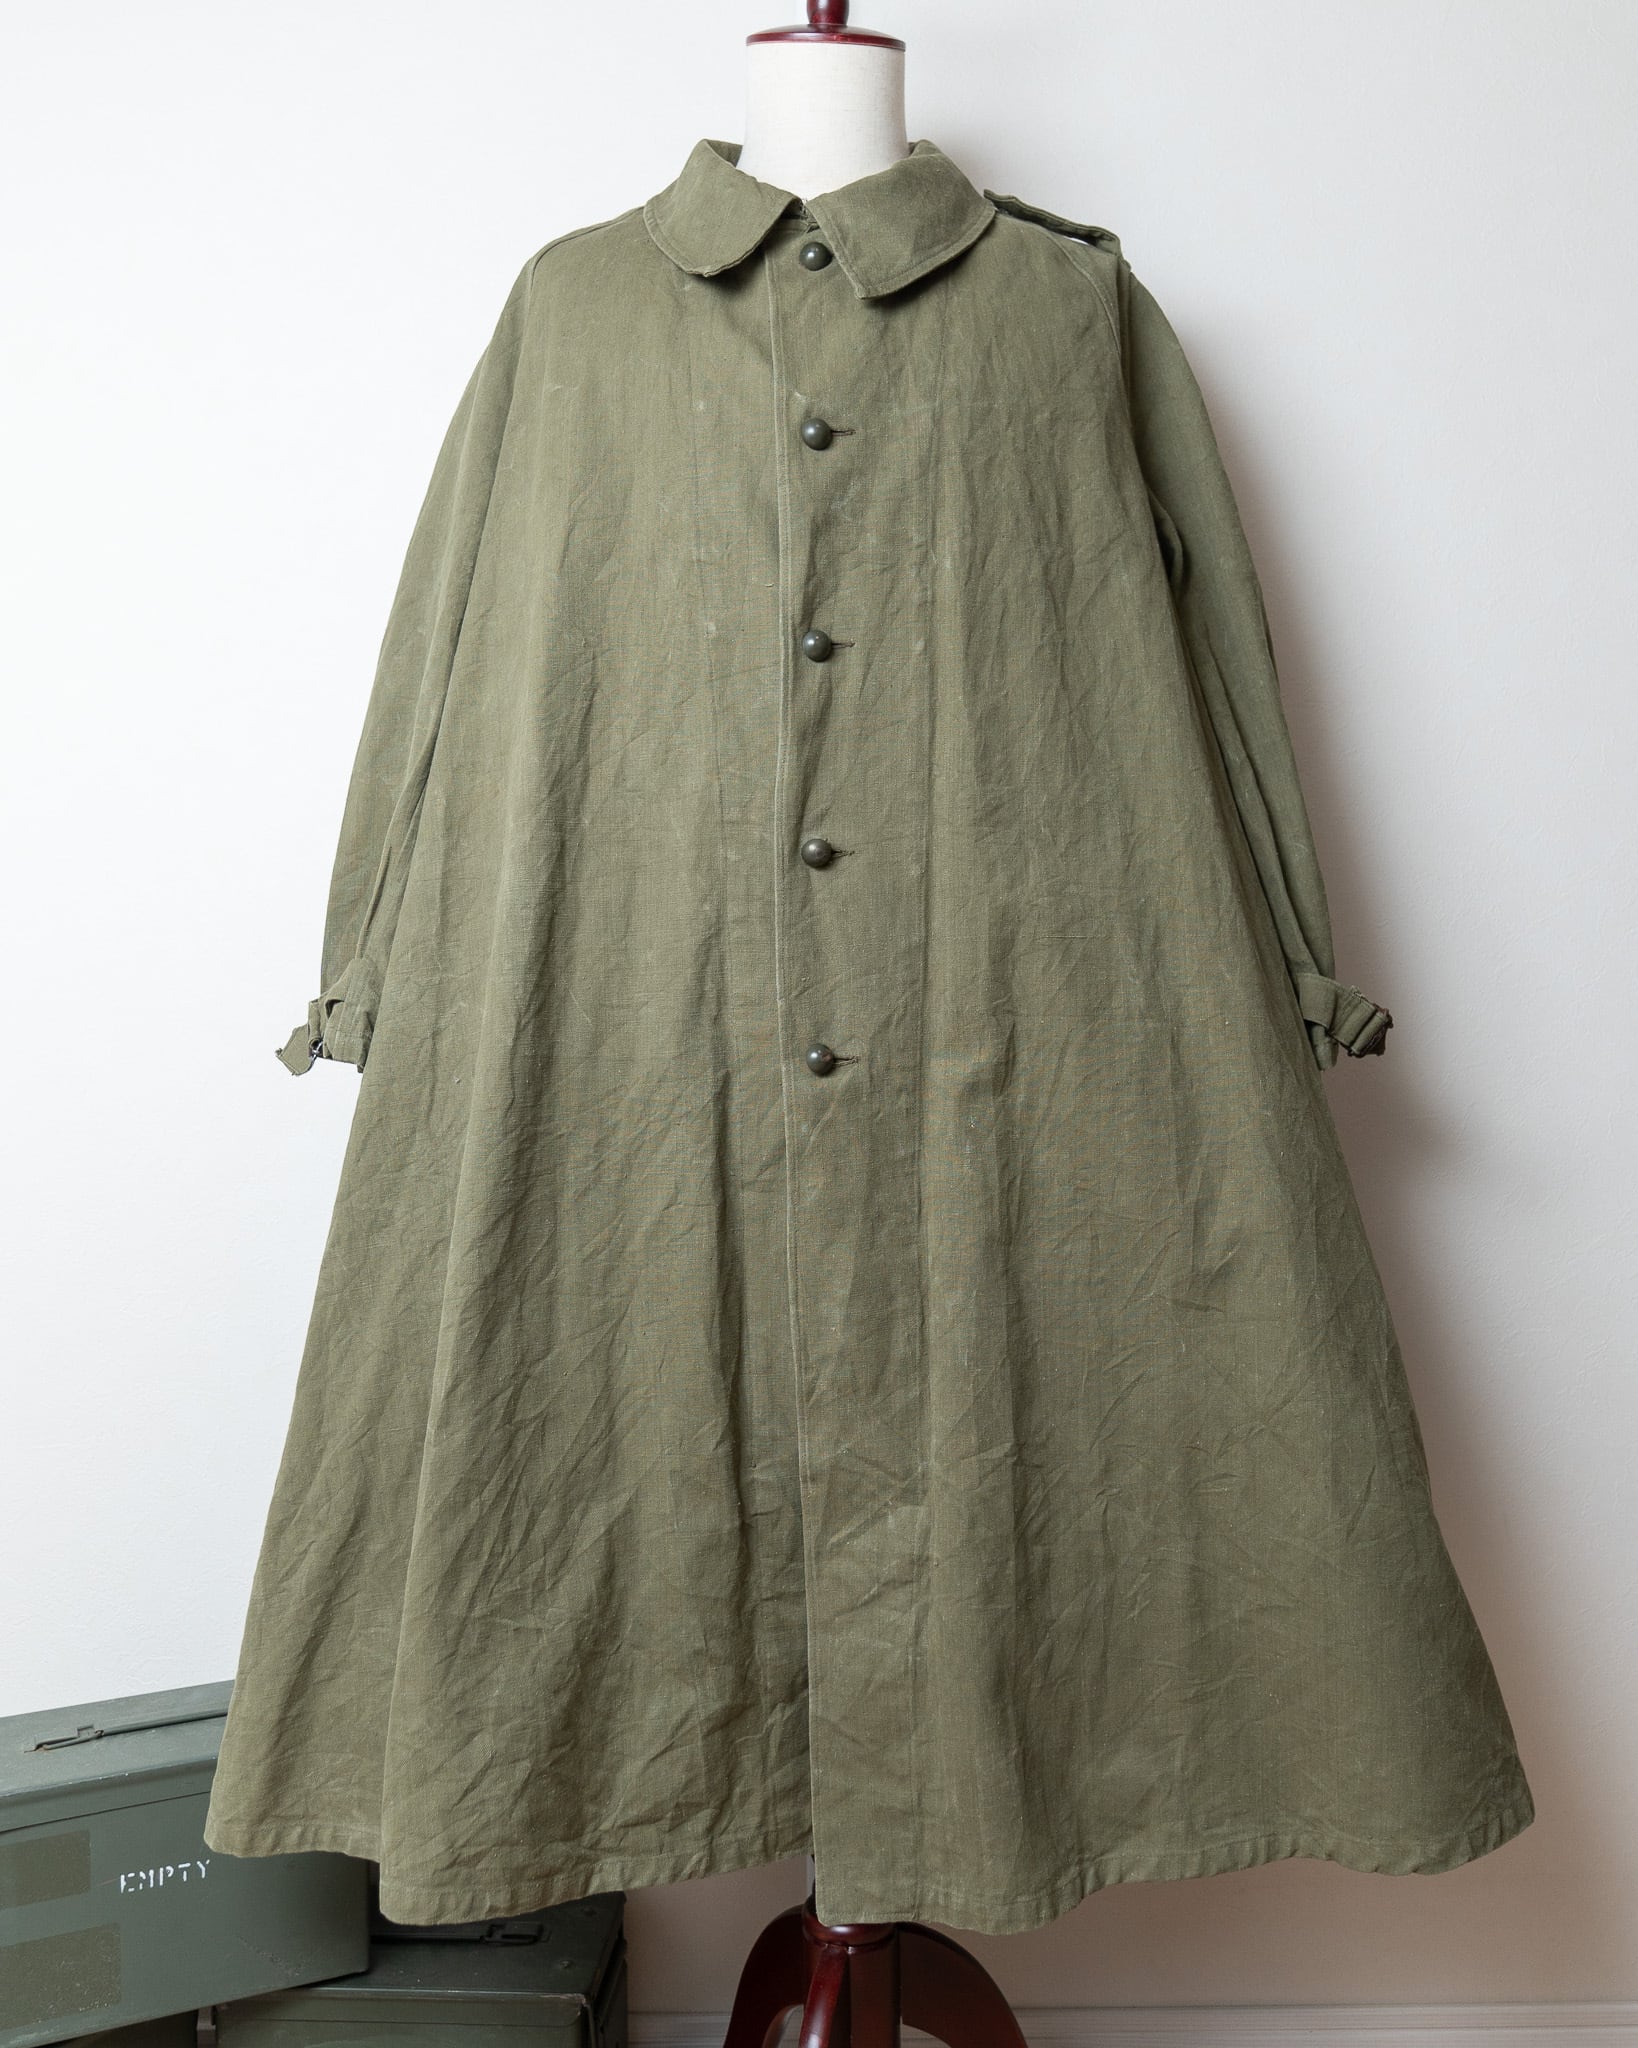 40s French Army M-35 Motorcycle Coat